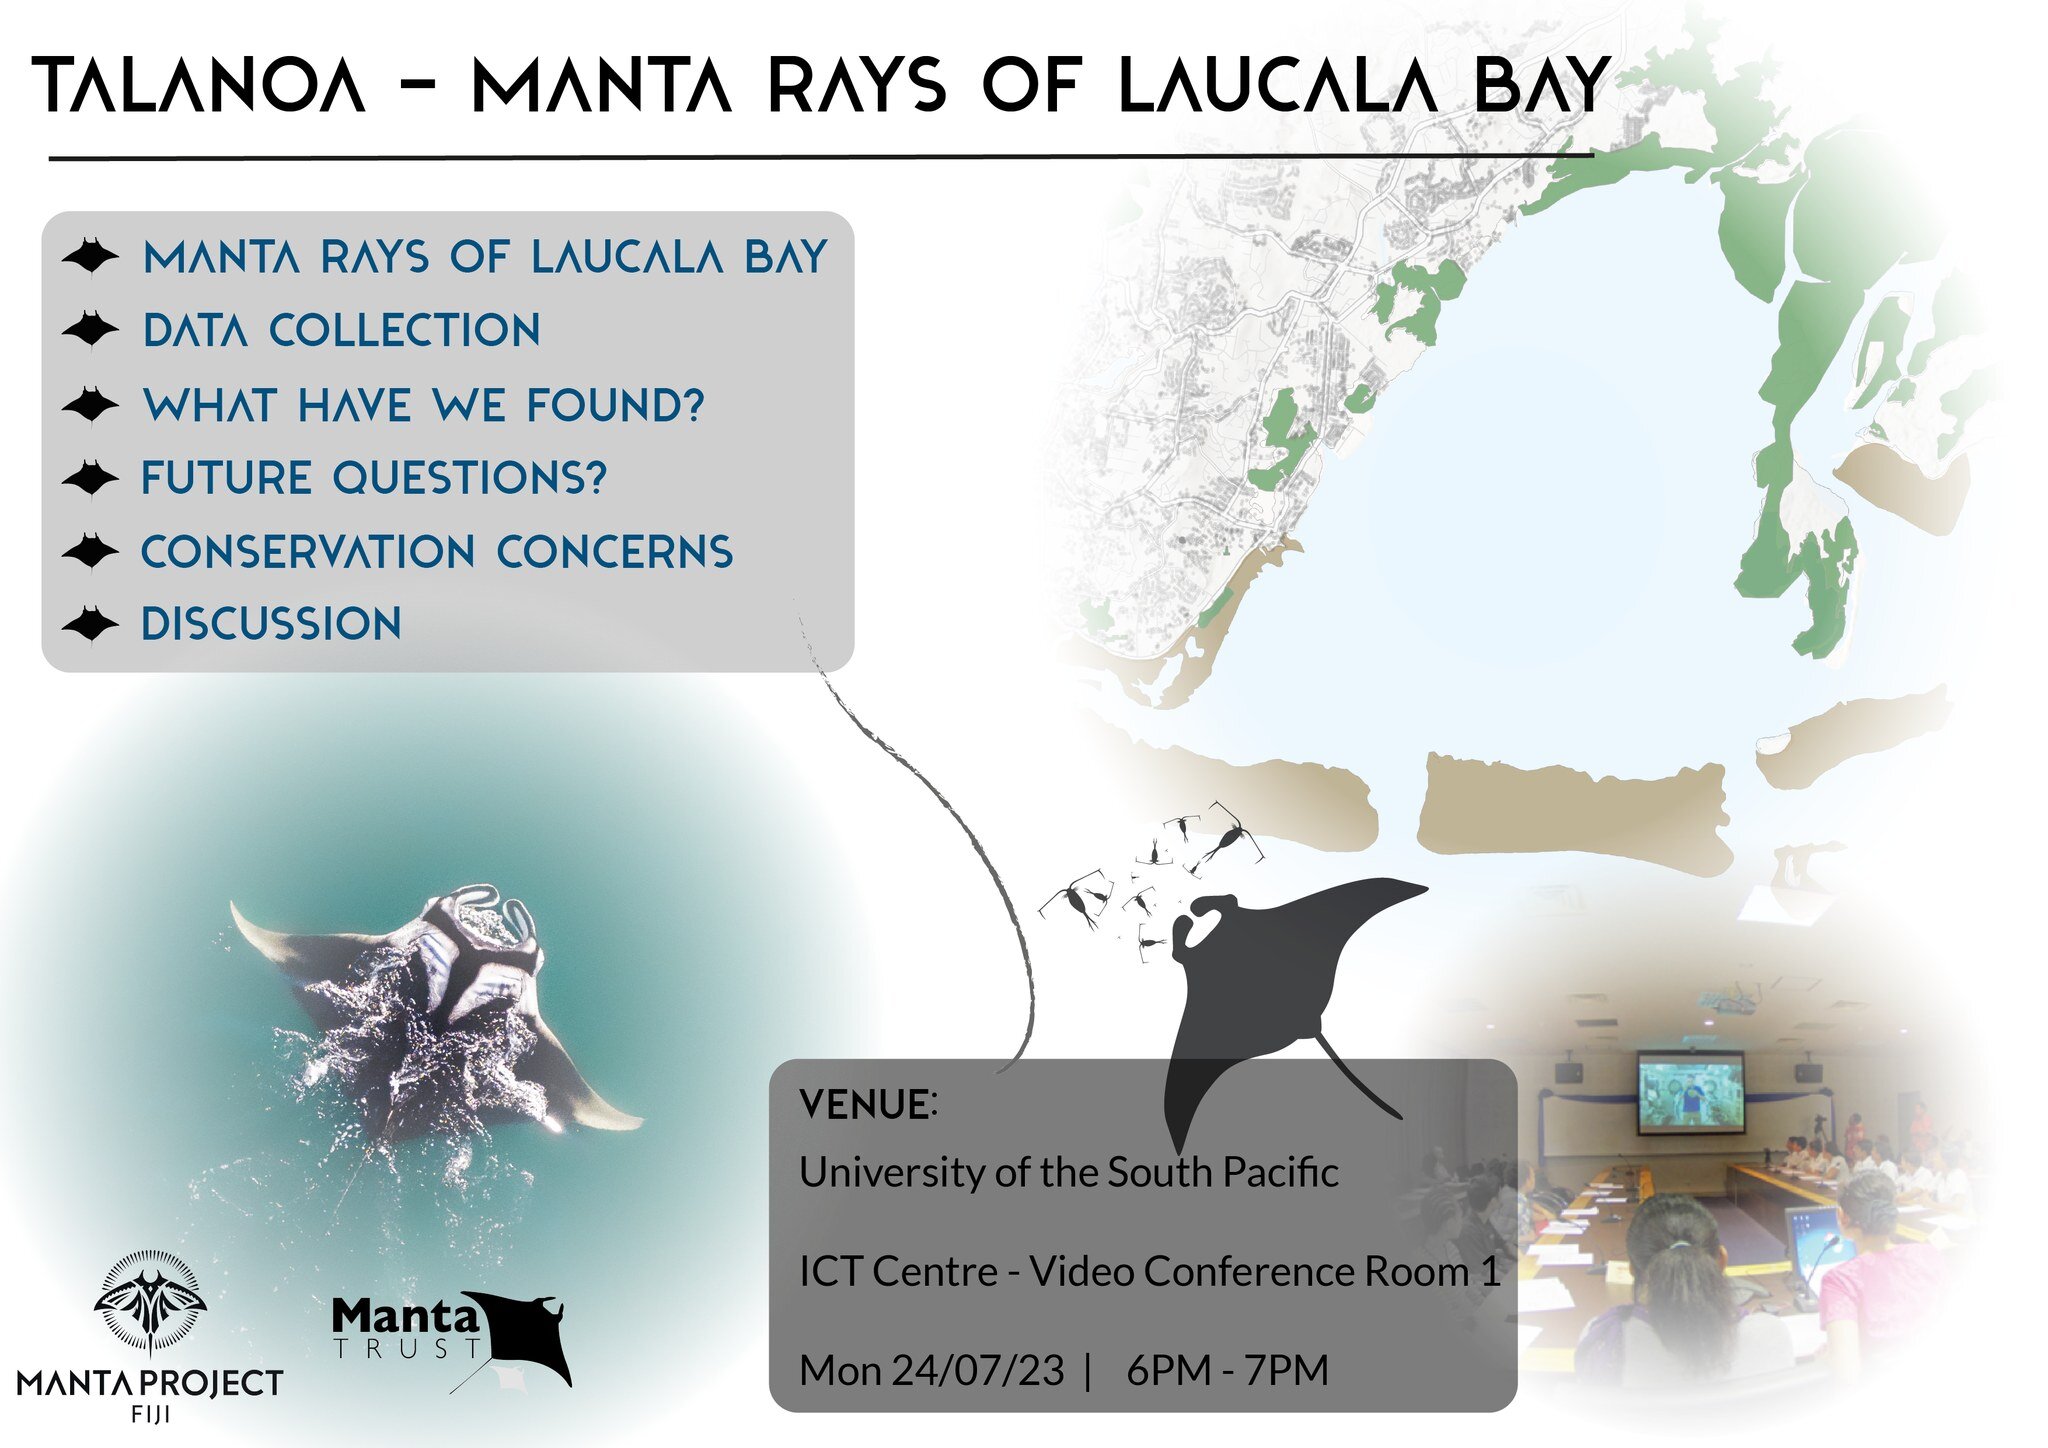 We are incredibly excited to host a Talanoa on the Manta Rays of Laucala Bay at USP on Monday evening. In the last year we have gathered a large amount of data, which in itself has opened up more questions about these gentle giants. 

We would like t